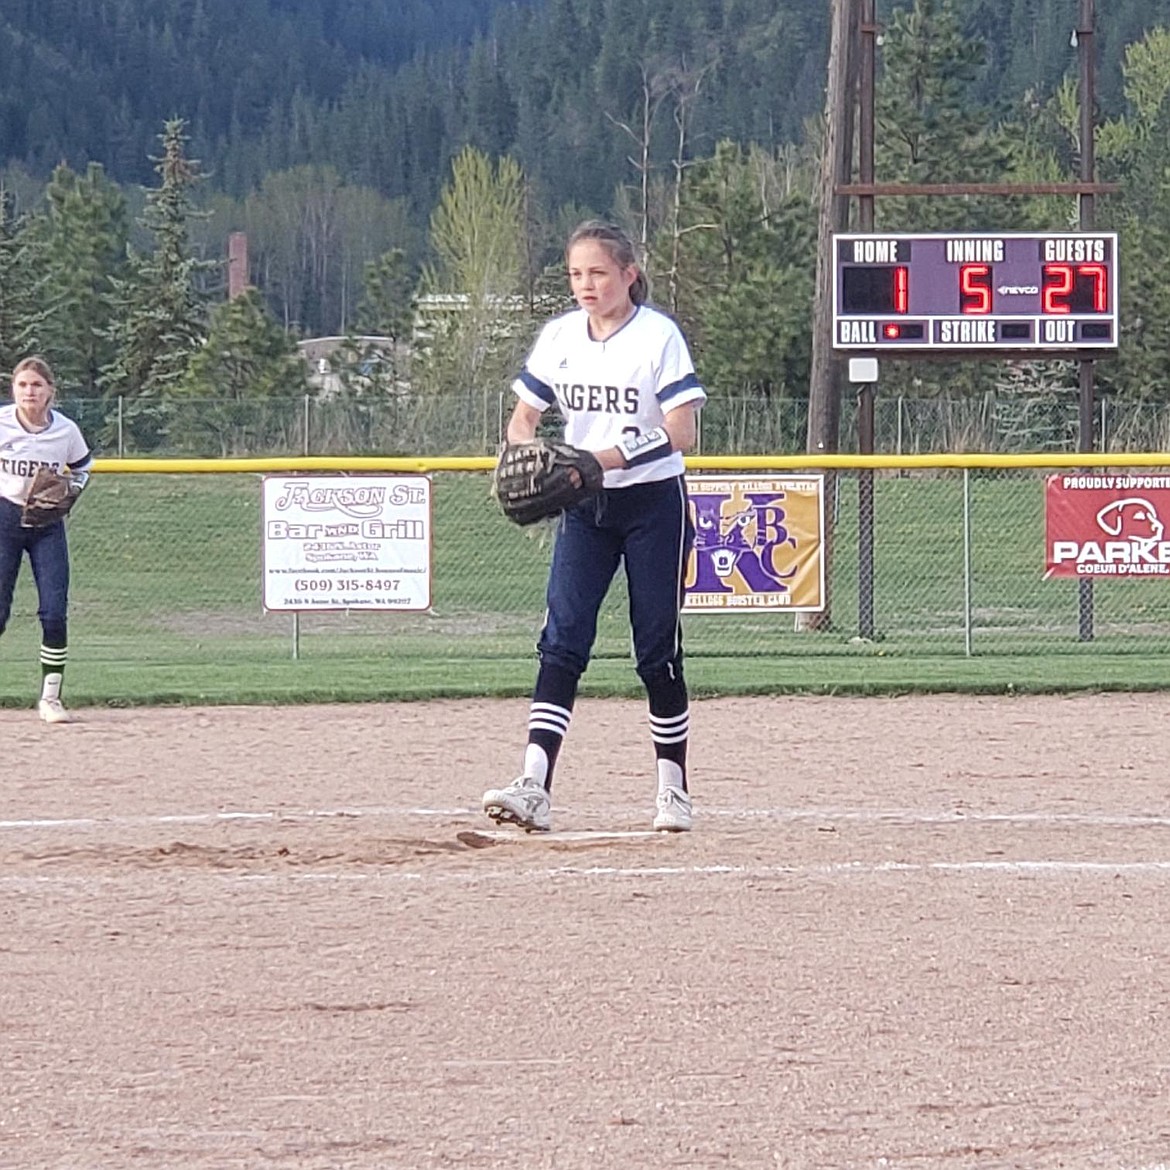 Photo courtesy JENNY WHALEY
Timberlake High freshman Casey Whaley, who was recipient of a kidney transplant from her mother in November, pitched a scoreless inning with three strikeouts against Kellogg last Tuesday in her first outing with the Tigers' varsity softball team.